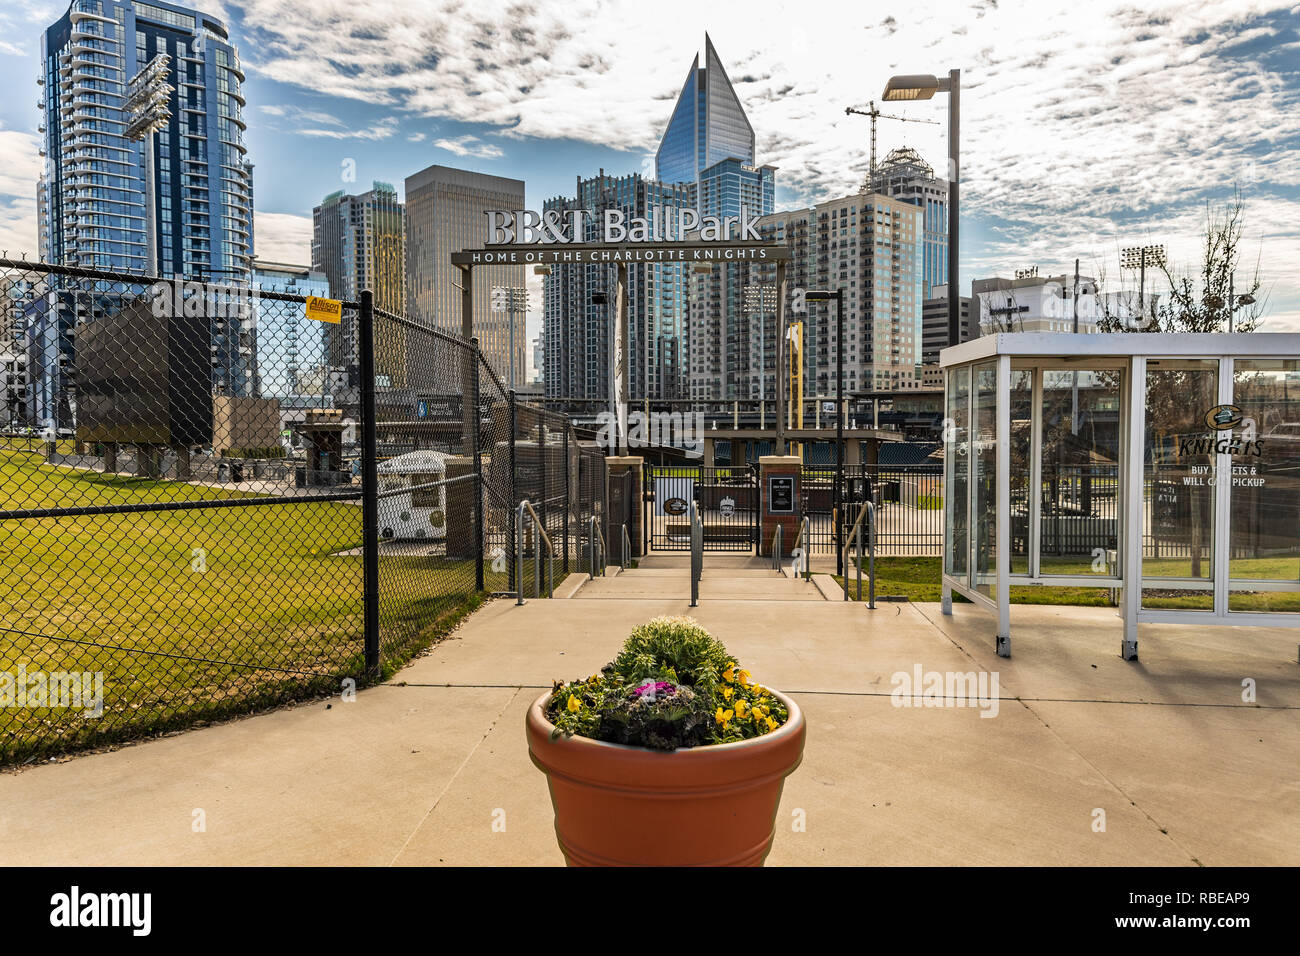 CHARLOTTE, NC, USA-1/8/19: The BB&T Ballpark in uptown Charlotte, with skyscrapers in background. Stock Photo